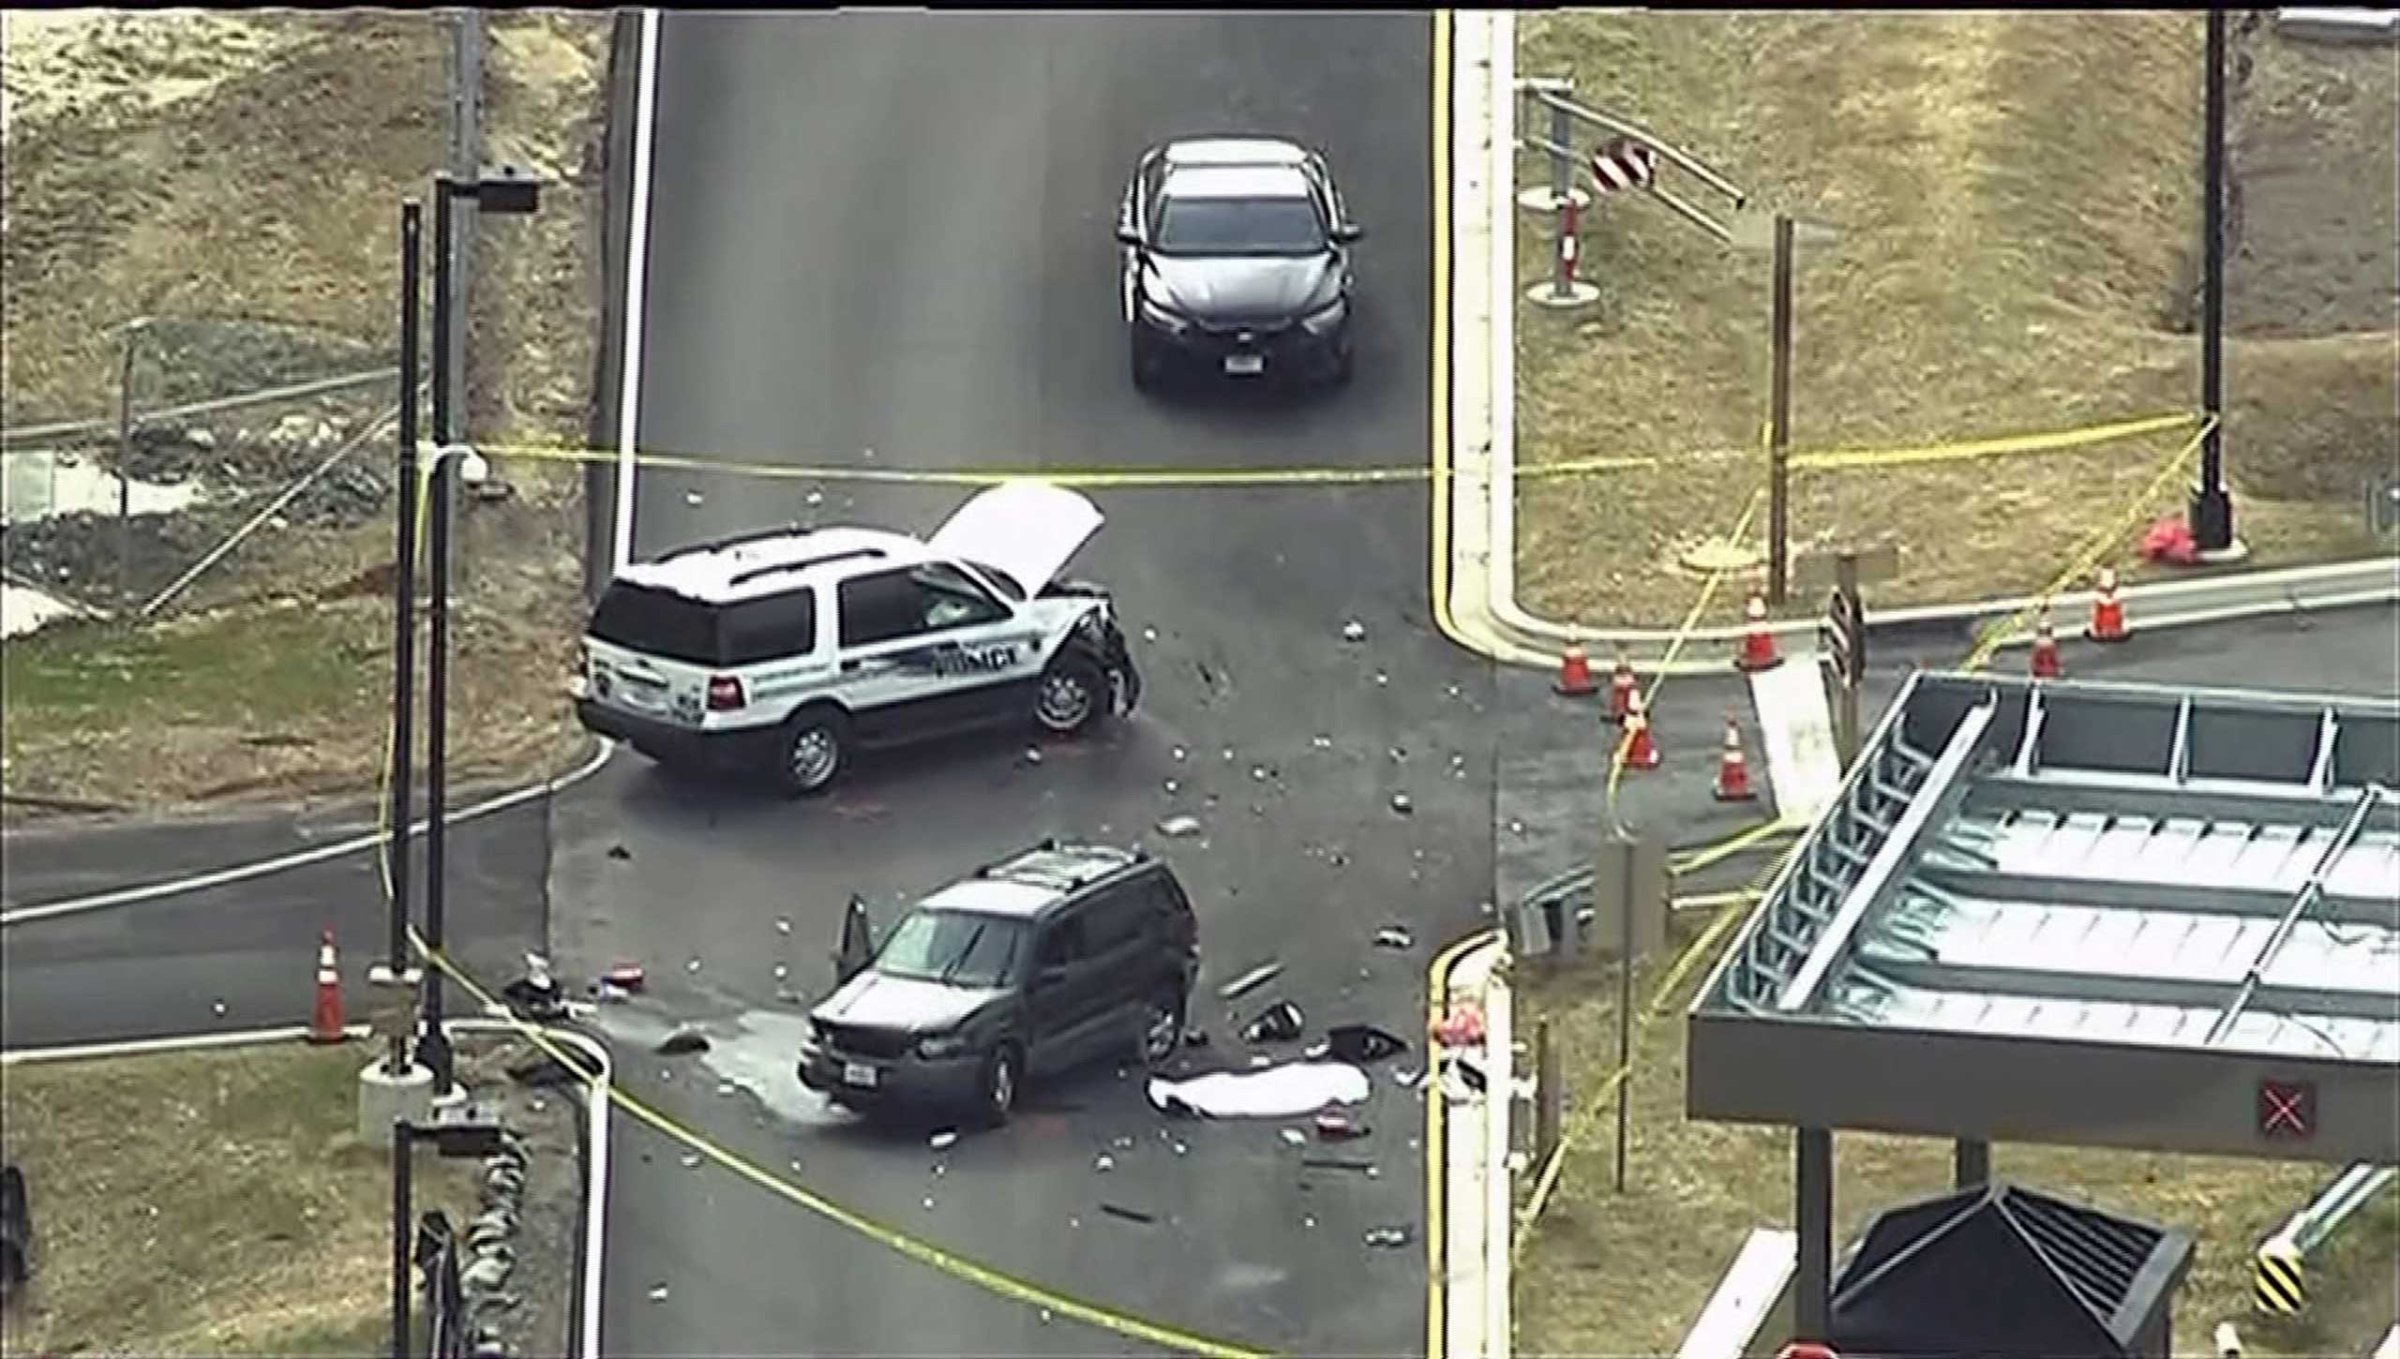 An aerial view of a shooting scene at the National Security Agency at Fort Meade in Maryland is pictured in this still image take from video, March 30, 2015.